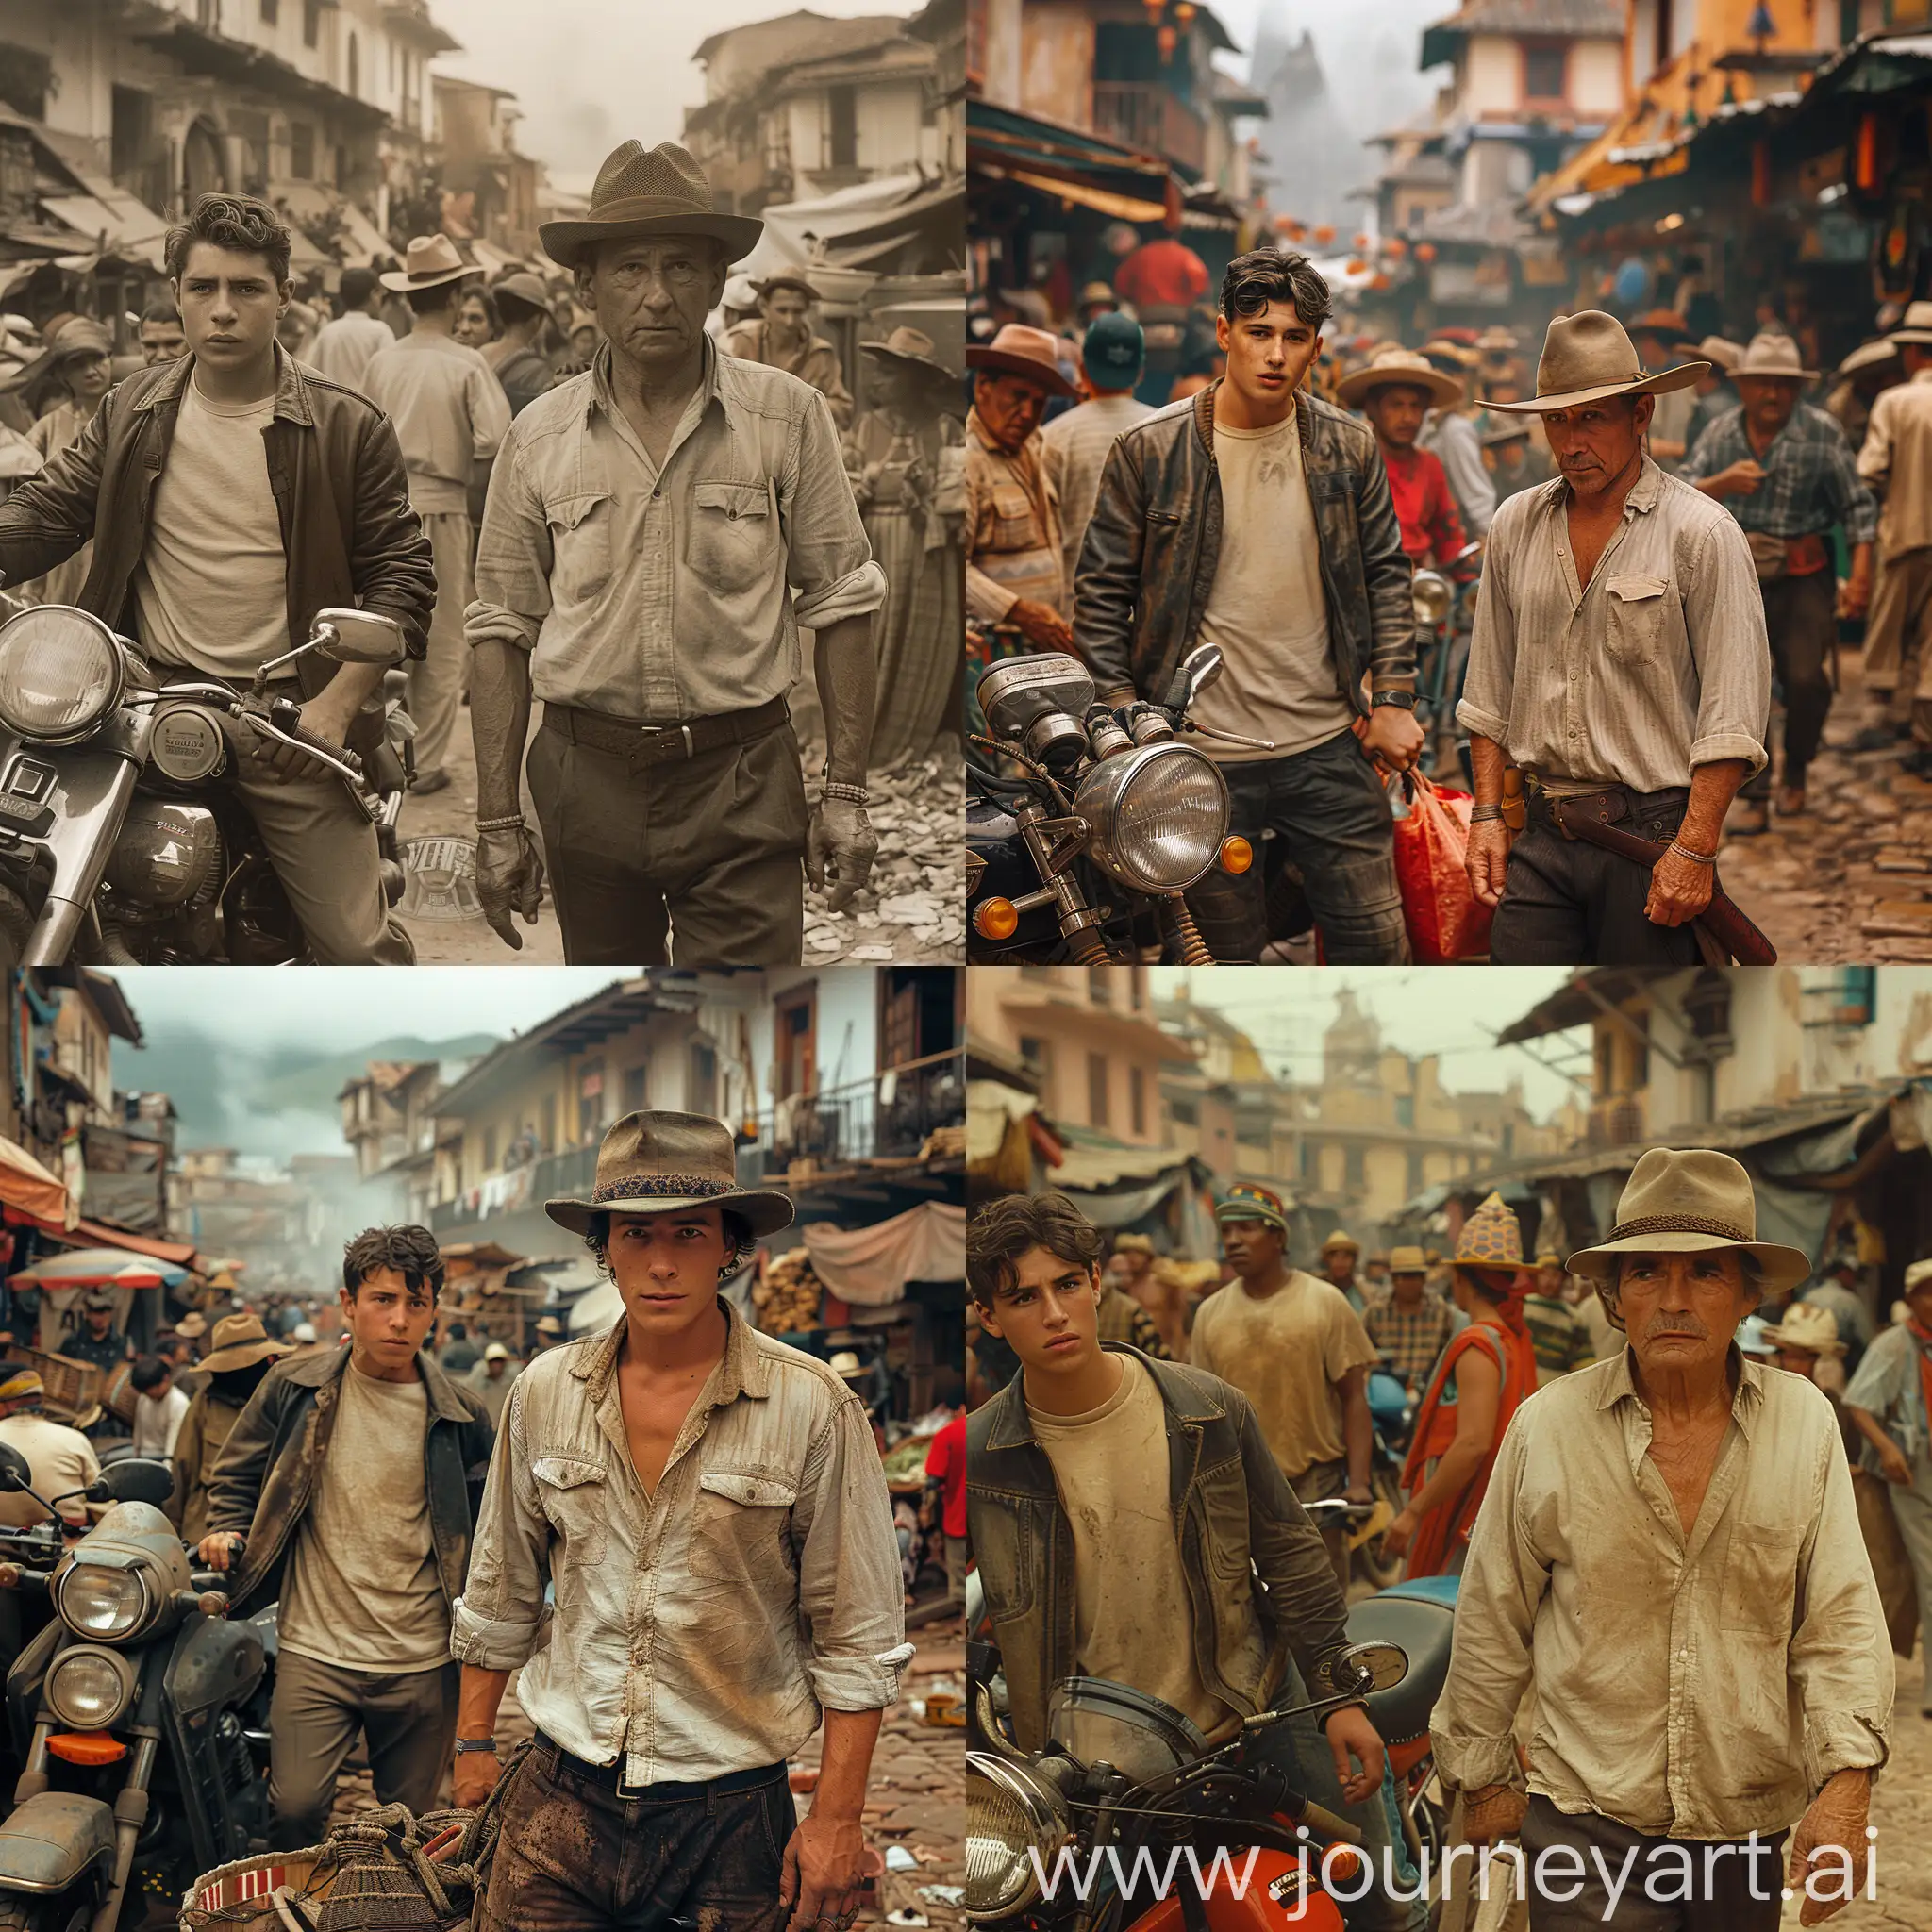  a bustling market or street scene in a rustic or perhaps historical setting. There are two main characters in the foreground that stand out from the rest:

On the left, there is a younger man wearing a light-colored T-shirt and a leather jacket, standing next to a motorcycle. He seems to be in his 20s or 30s, with a thoughtful or serious expression on his face.

On the right, there is an older man dressed in a light-colored shirt, dark pants, and a fedora-style hat. He exudes a sense of ruggedness and experience, and he seems to be walking with purpose through the market area.

The background is filled with other individuals who appear to be locals, dressed in various types of attire that suggest a cultural or regional identity, with many wearing hats and some in woven garments. The architecture and vehicles visible in the scene have a vintage look, indicating that the setting might be in a past decade or designed to give an old-fashioned atmosphere. There's a sense of activity and everyday life, with people engaged in various interactions or moving about the marketplace. The setting and costumes suggest that the narrative could be taking place in a Central or South American location, or somewhere with a similar cultural backdrop. --style raw --stylize 750.